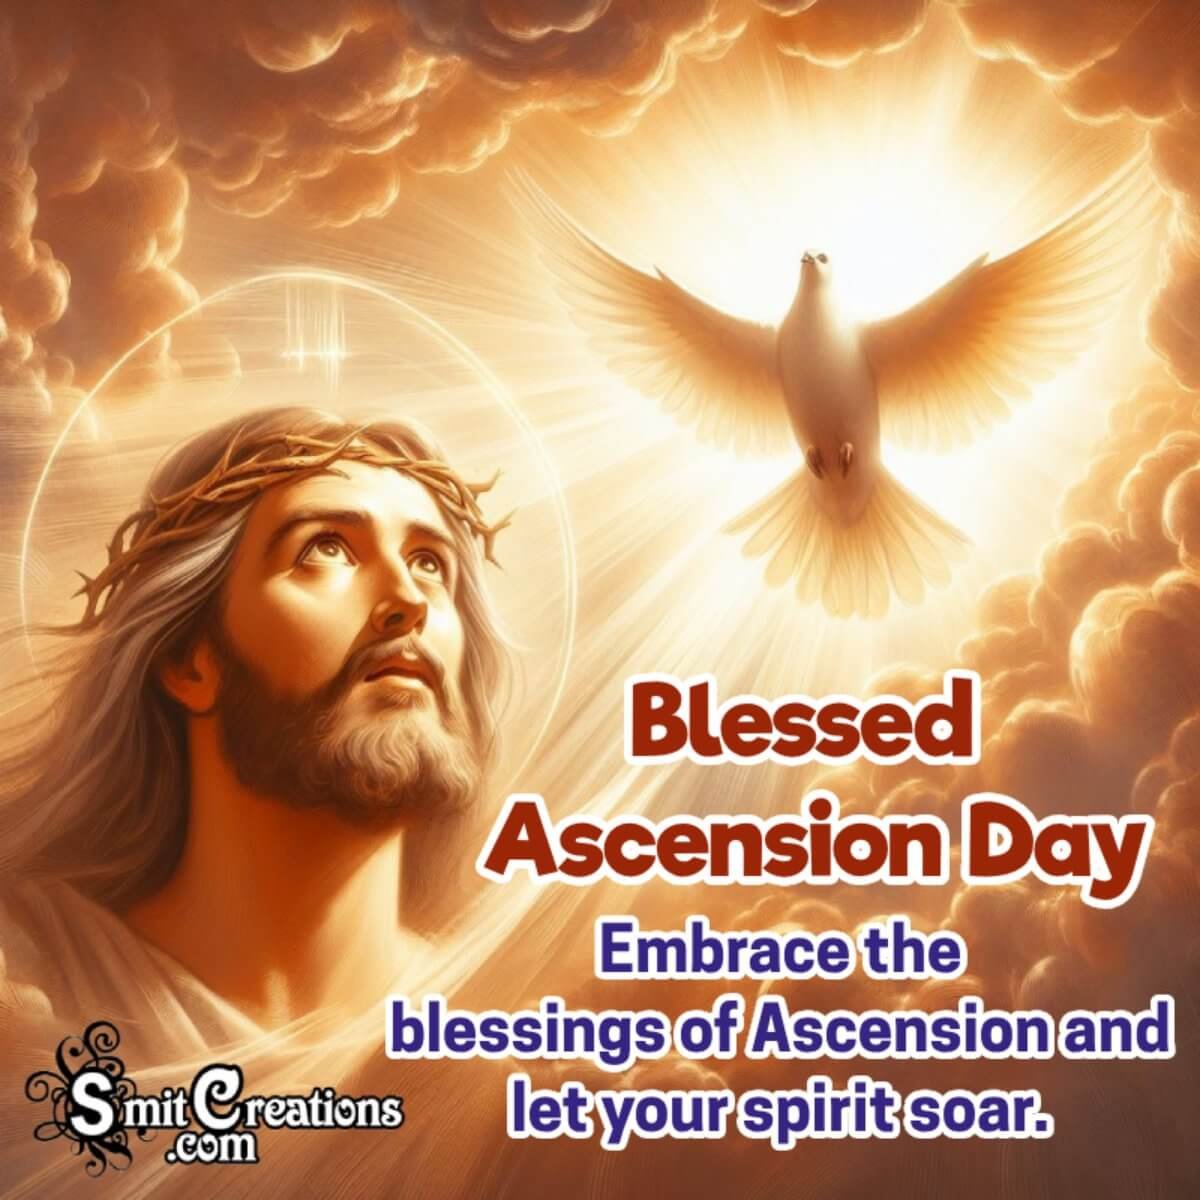 Blessed Ascension Day Message Pic